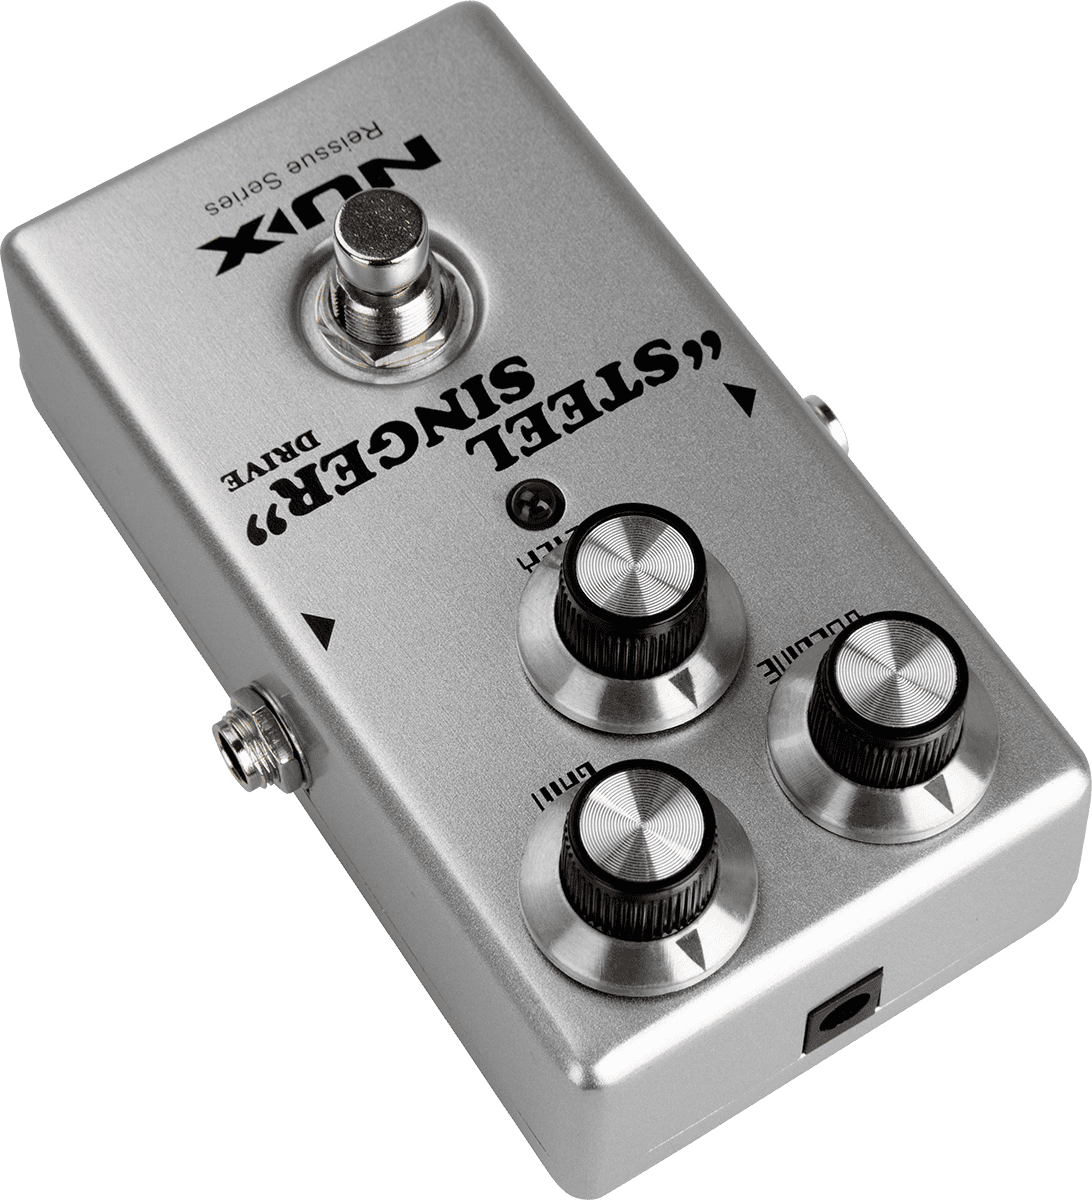 Overdrive pedal, inspired by California tone